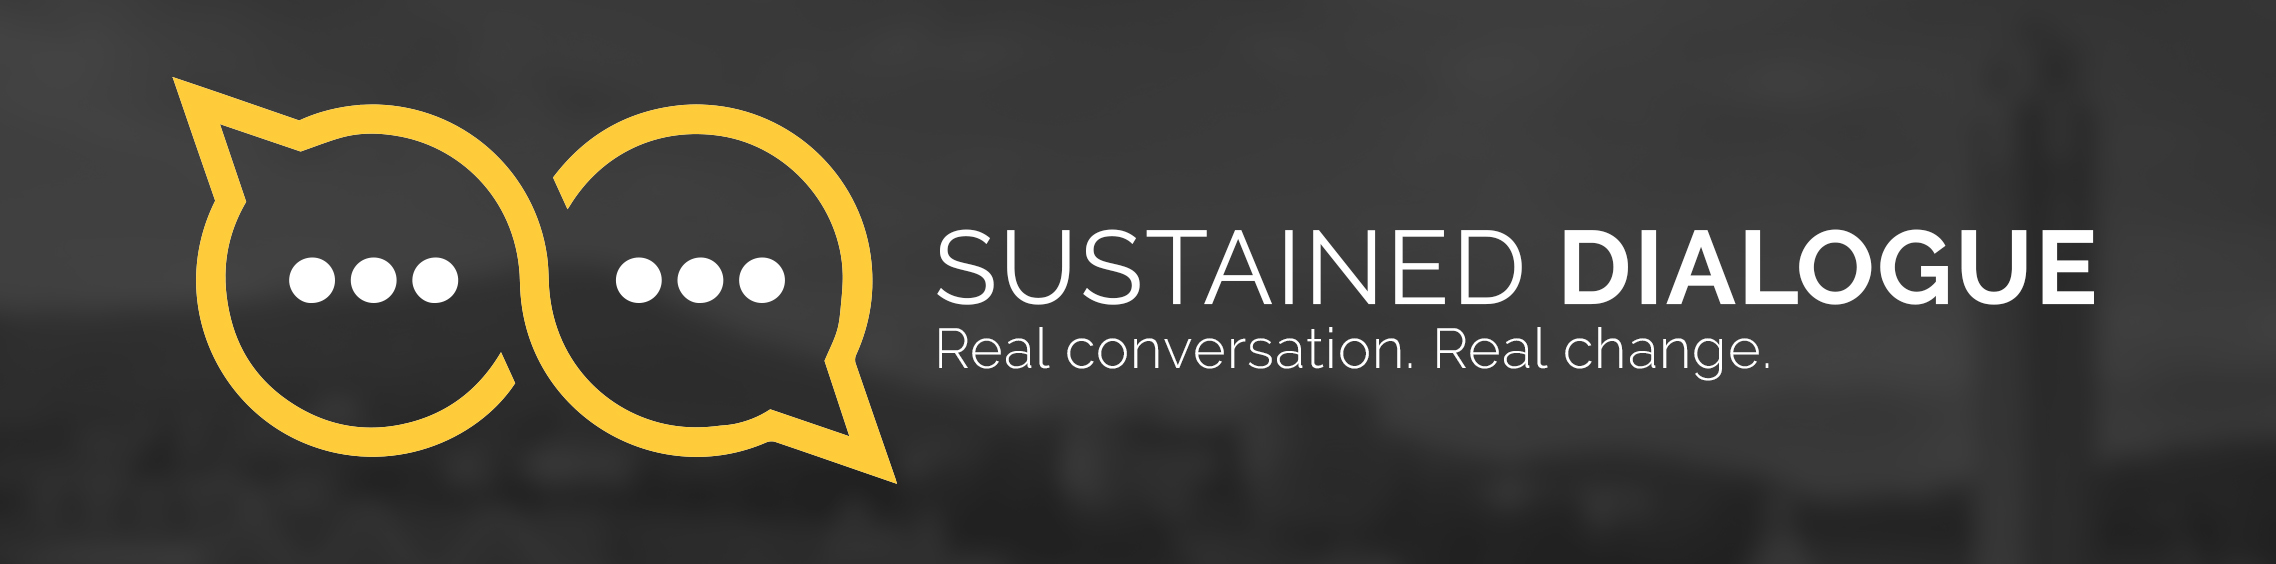 Sustained Dialogue Website Banner 1